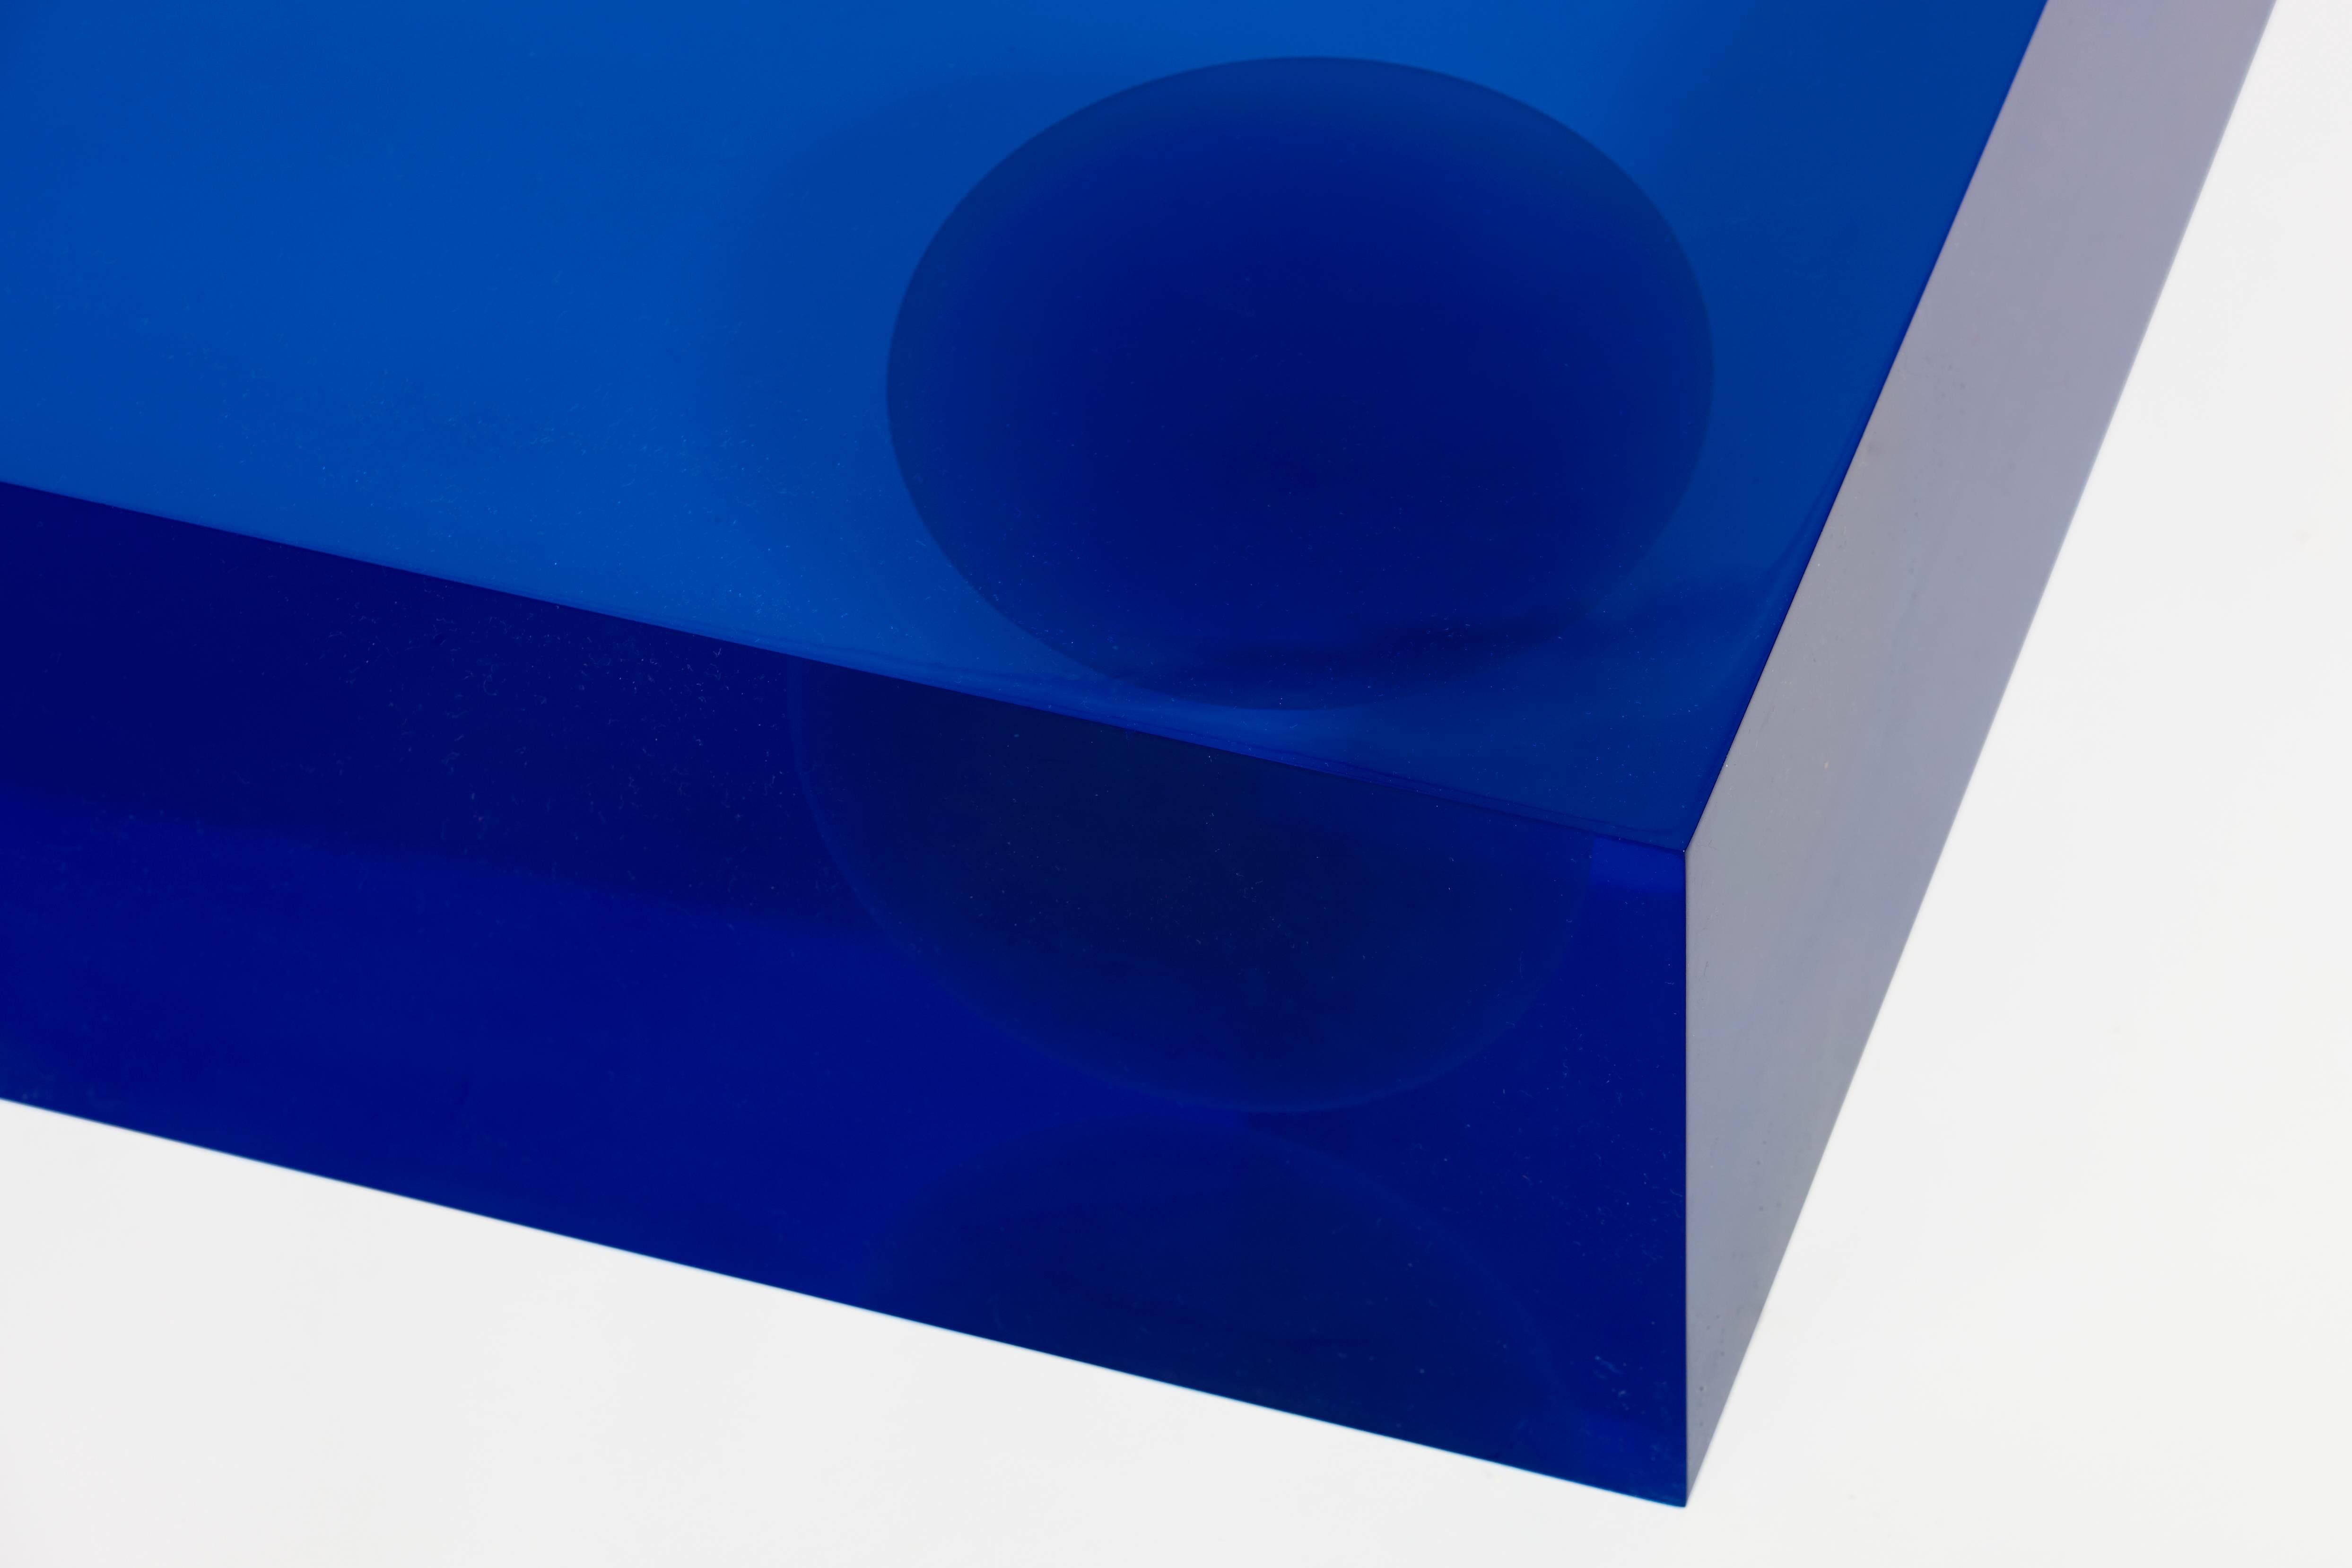 Faye Toogood [British, b. 1977]
Element Table Resin / Blue, 2011
Crystal resin
7.75 x 39.25 x 39.25 inches
20 x 100 x 100 cm

Faye Toogood was born in the UK in 1977 and graduated with a BA in the History of Art in 1998 from Bristol University. She